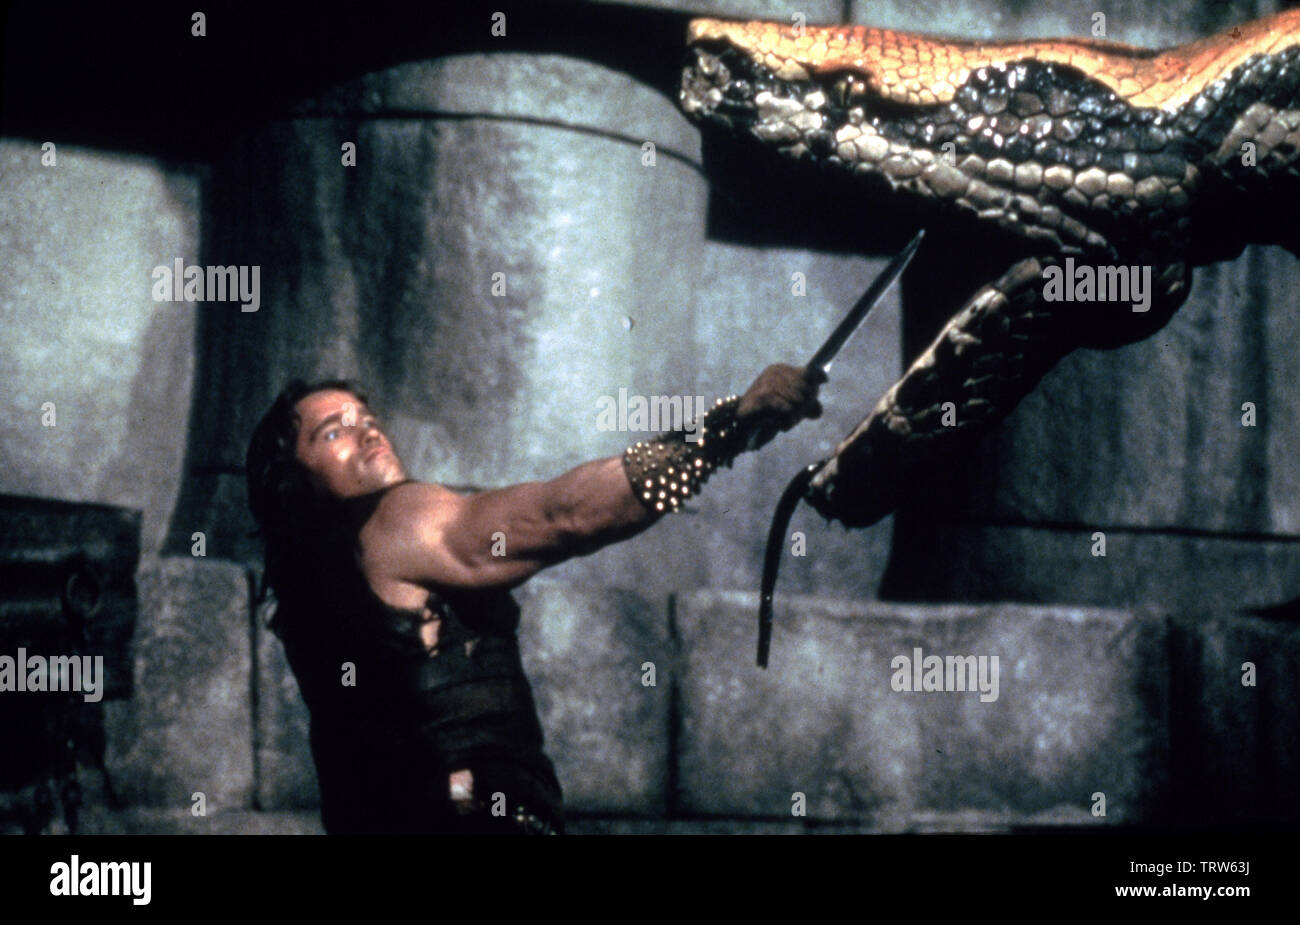 ARNOLD SCHWARZENEGGER in CONAN THE BARBARIAN (1982). Copyright: Editorial use only. No merchandising or book covers. This is a publicly distributed handout. Access rights only, no license of copyright provided. Only to be reproduced in conjunction with promotion of this film. Credit: DE LAURENTIS ENTERTAINMENT GROUP / Album Stock Photo